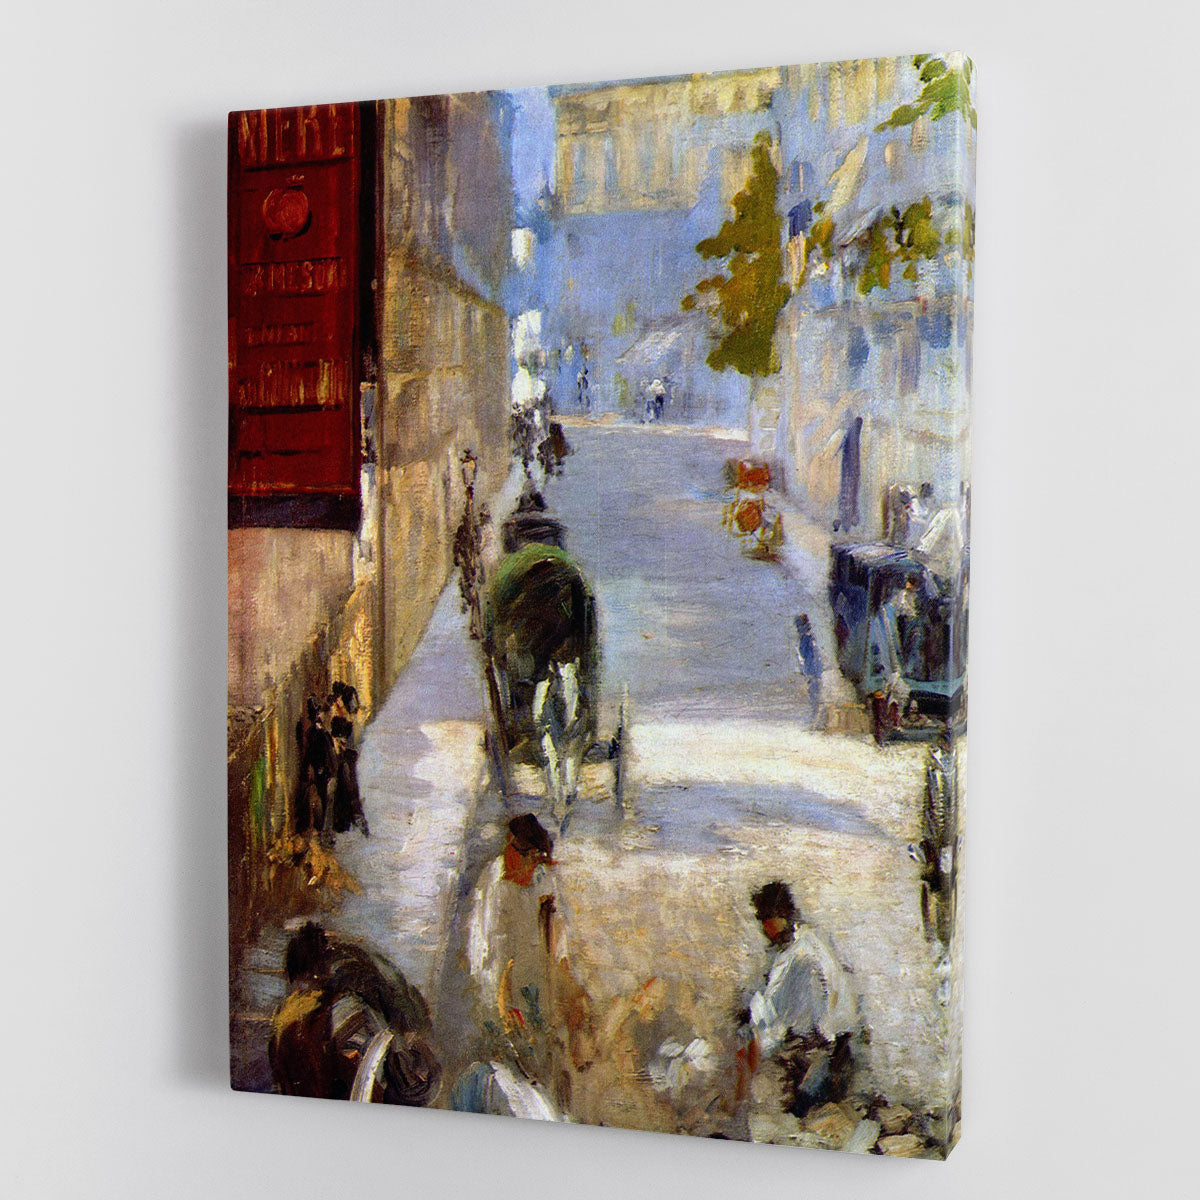 Road workers rue de Berne detail by Manet Canvas Print or Poster - Canvas Art Rocks - 1